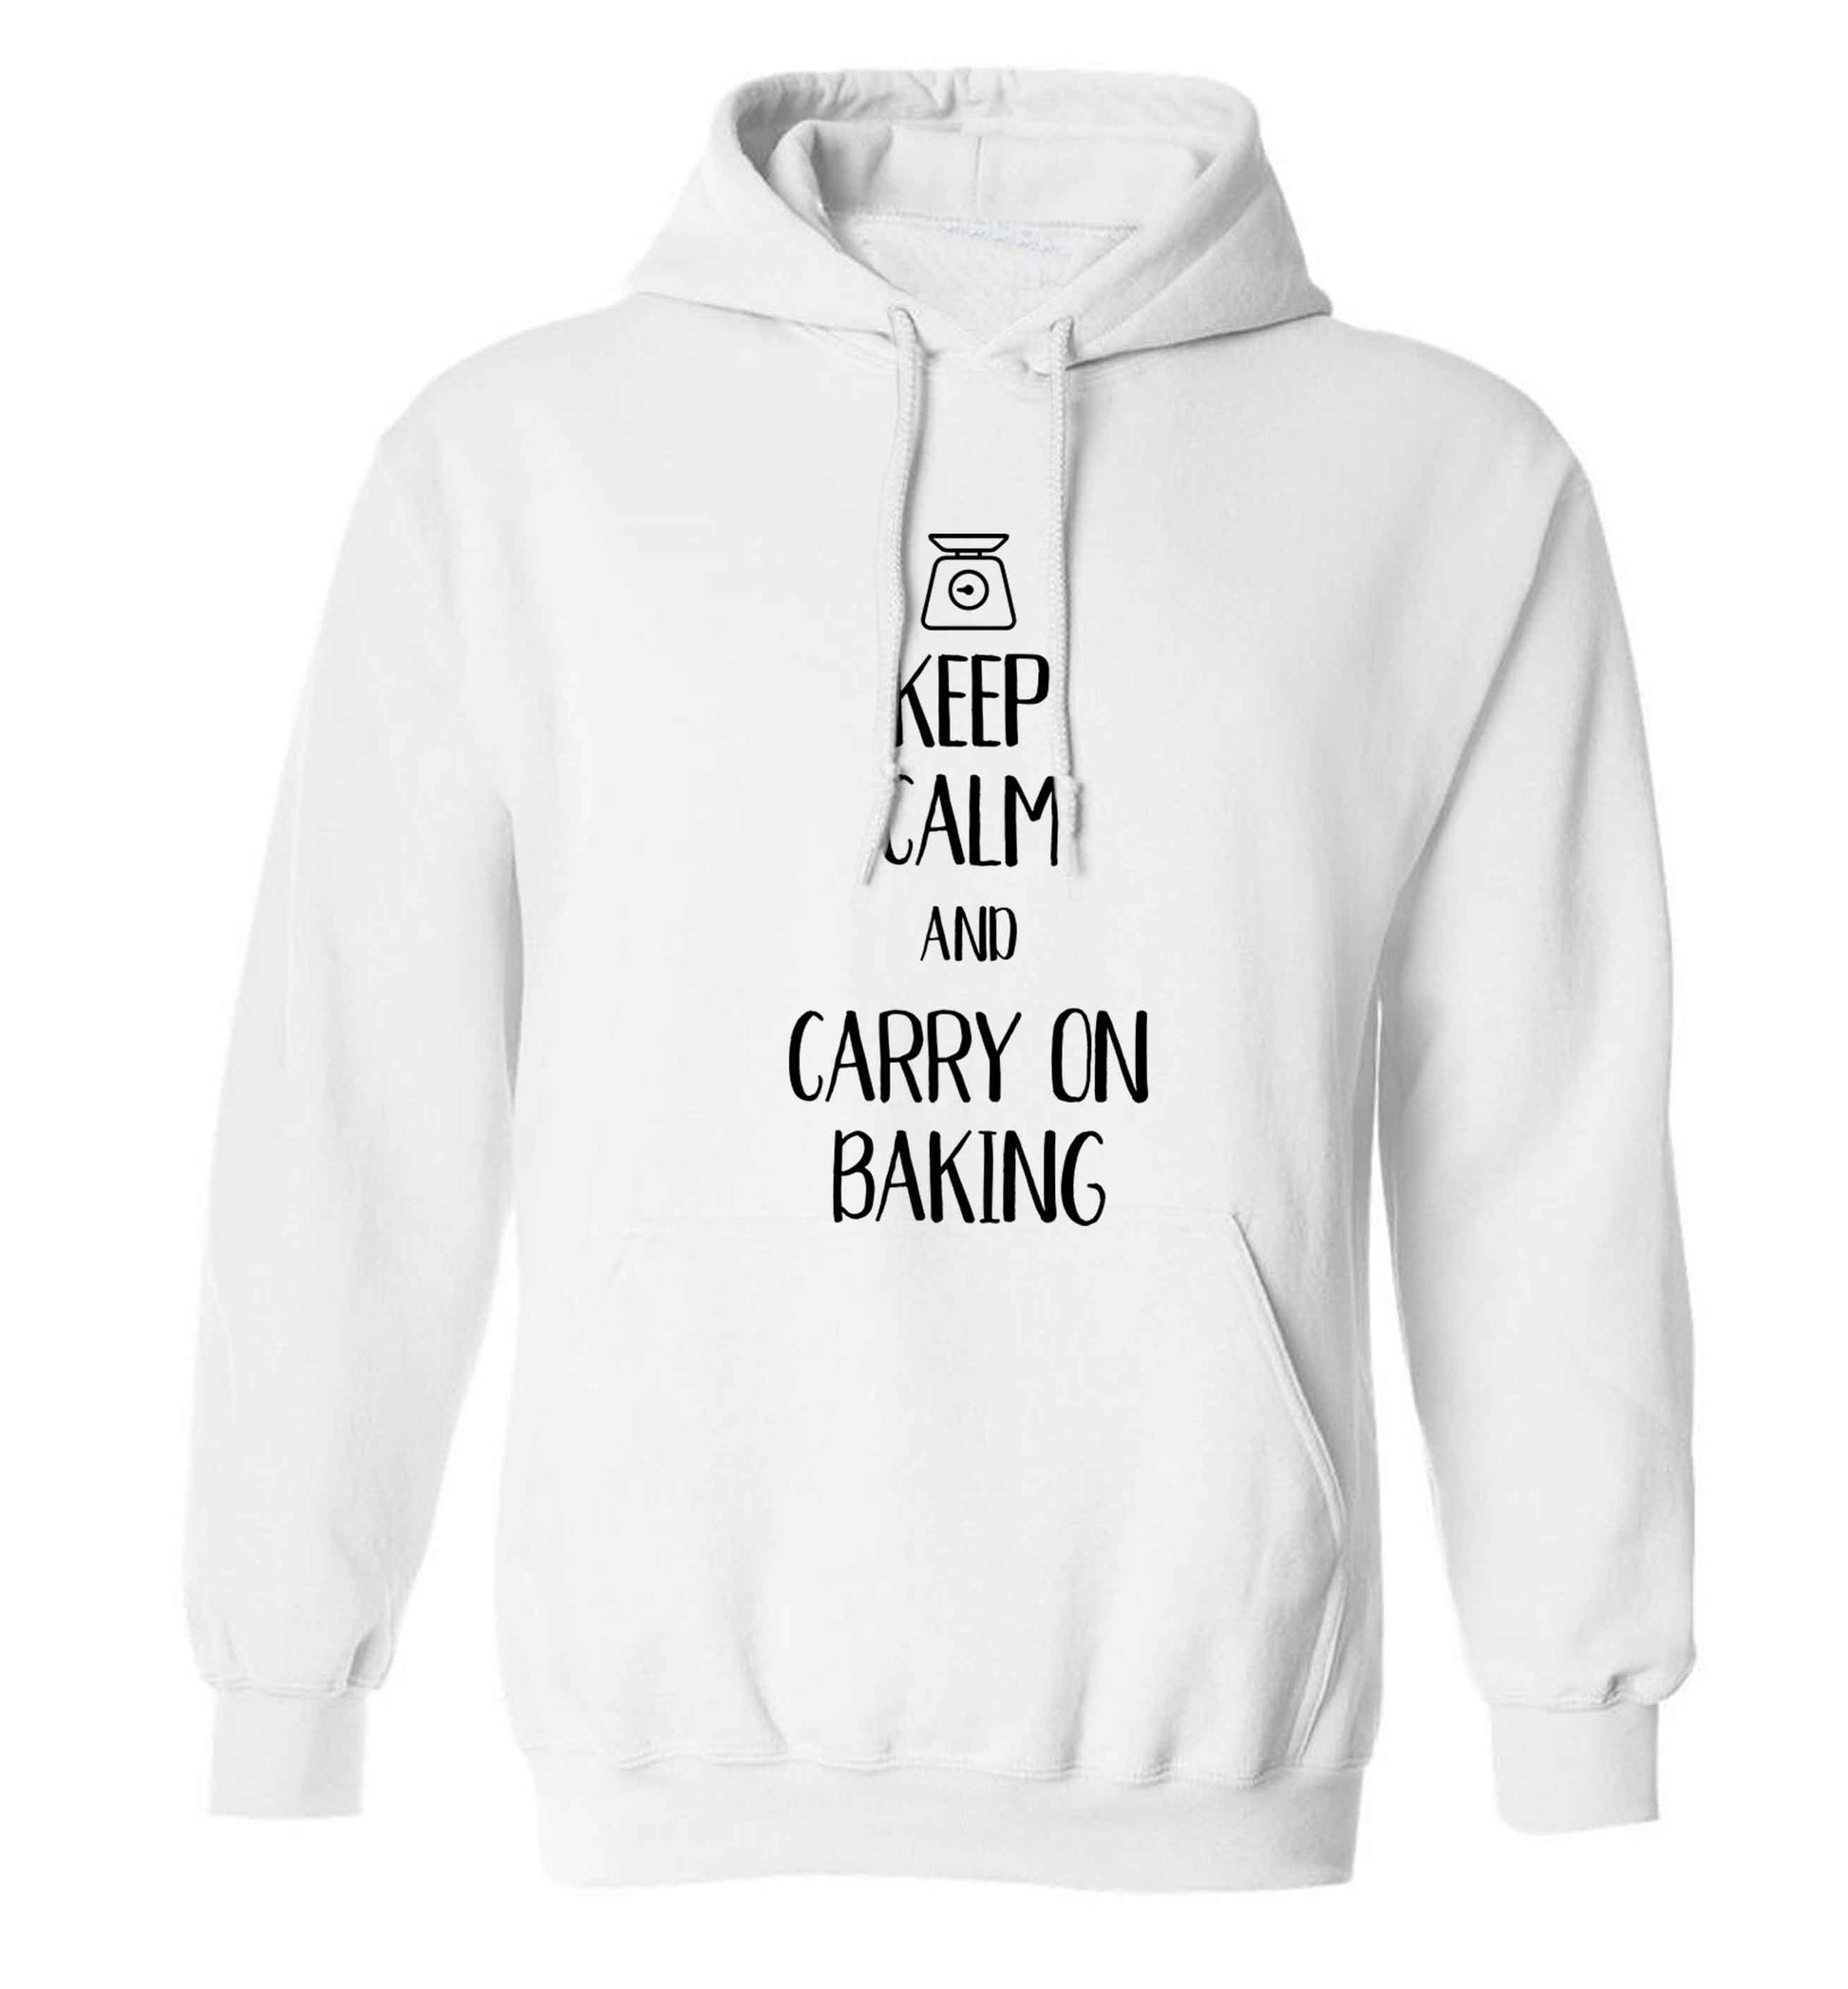 Keep calm and carry on baking adults unisex white hoodie 2XL